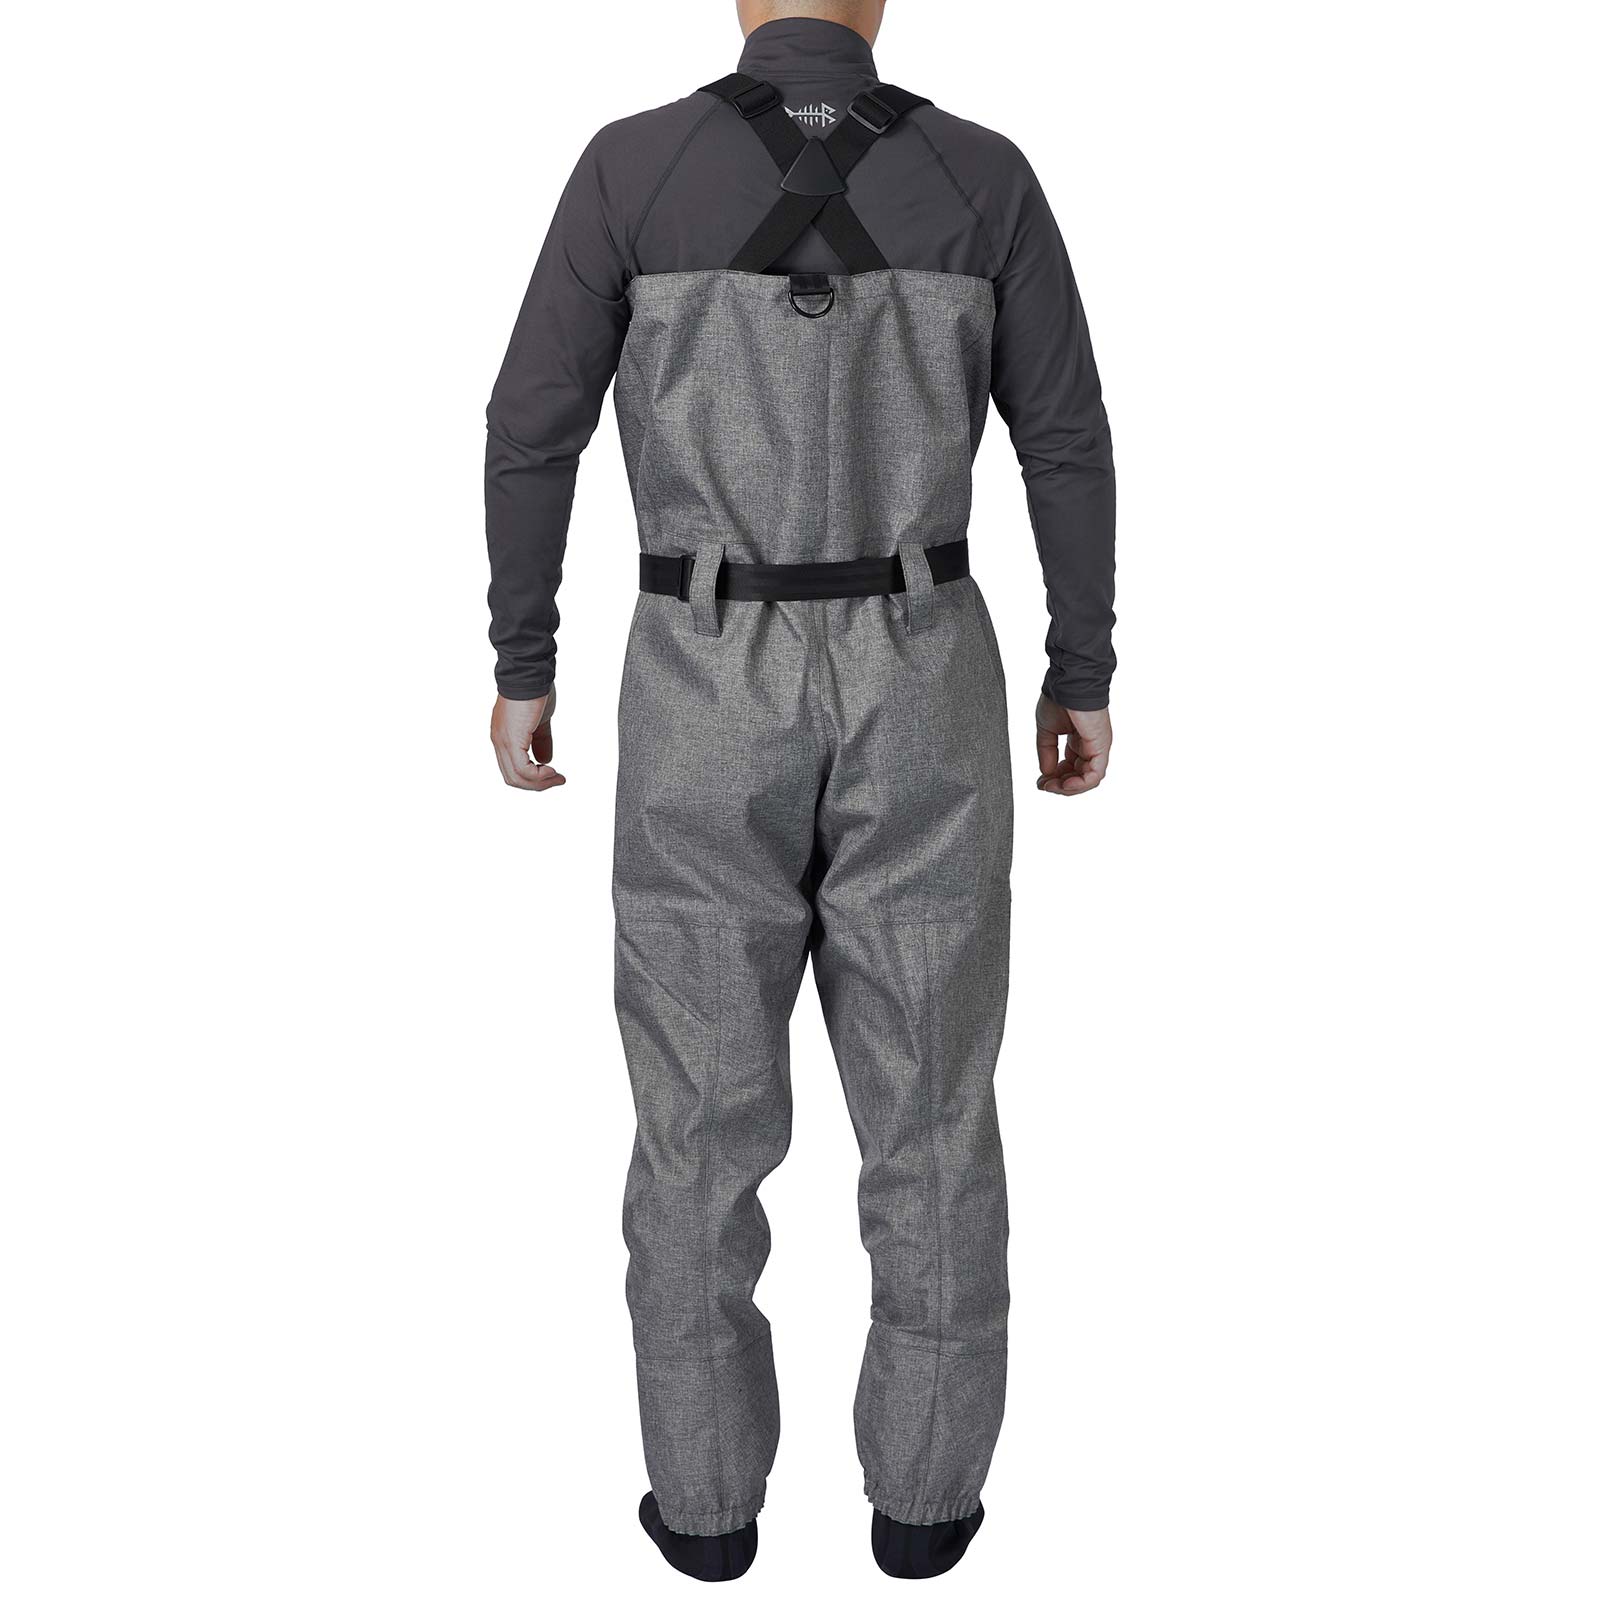 Men's Immerse Breathable Ripstop Wader - Stocking Foot Heather Grey / Small 7-8